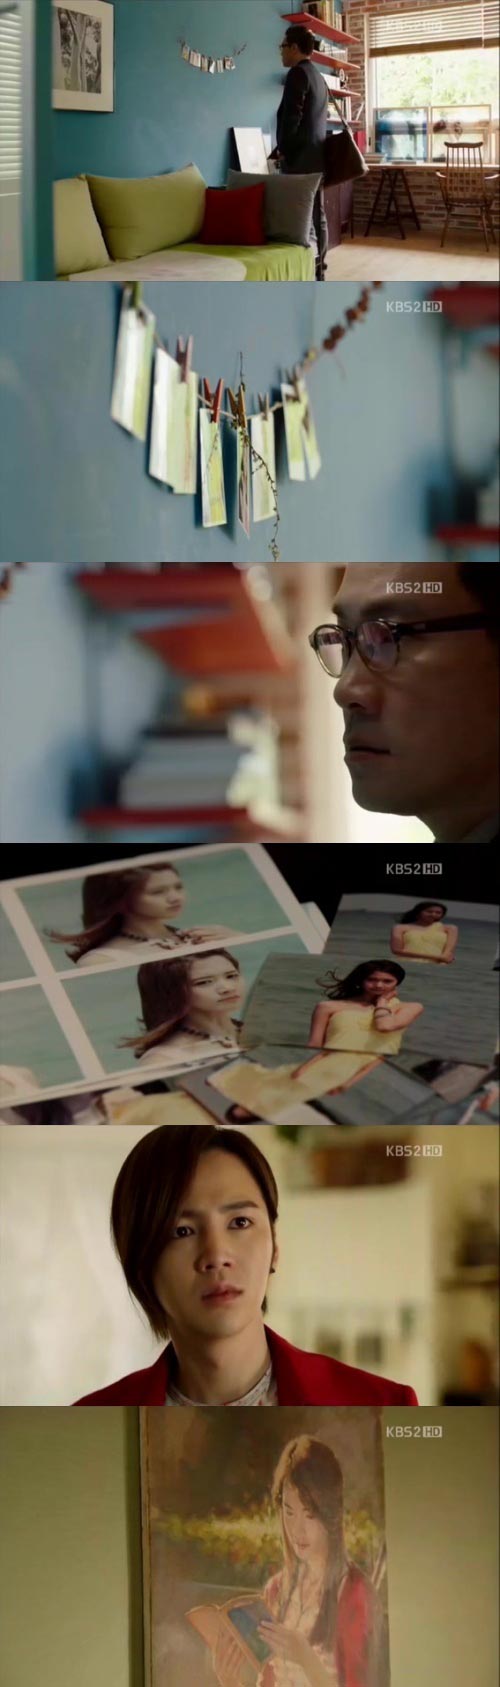 Jang Geun Suk’s Symbols of Love – YoonA’s Painting in 70s and Photo in 21st Century